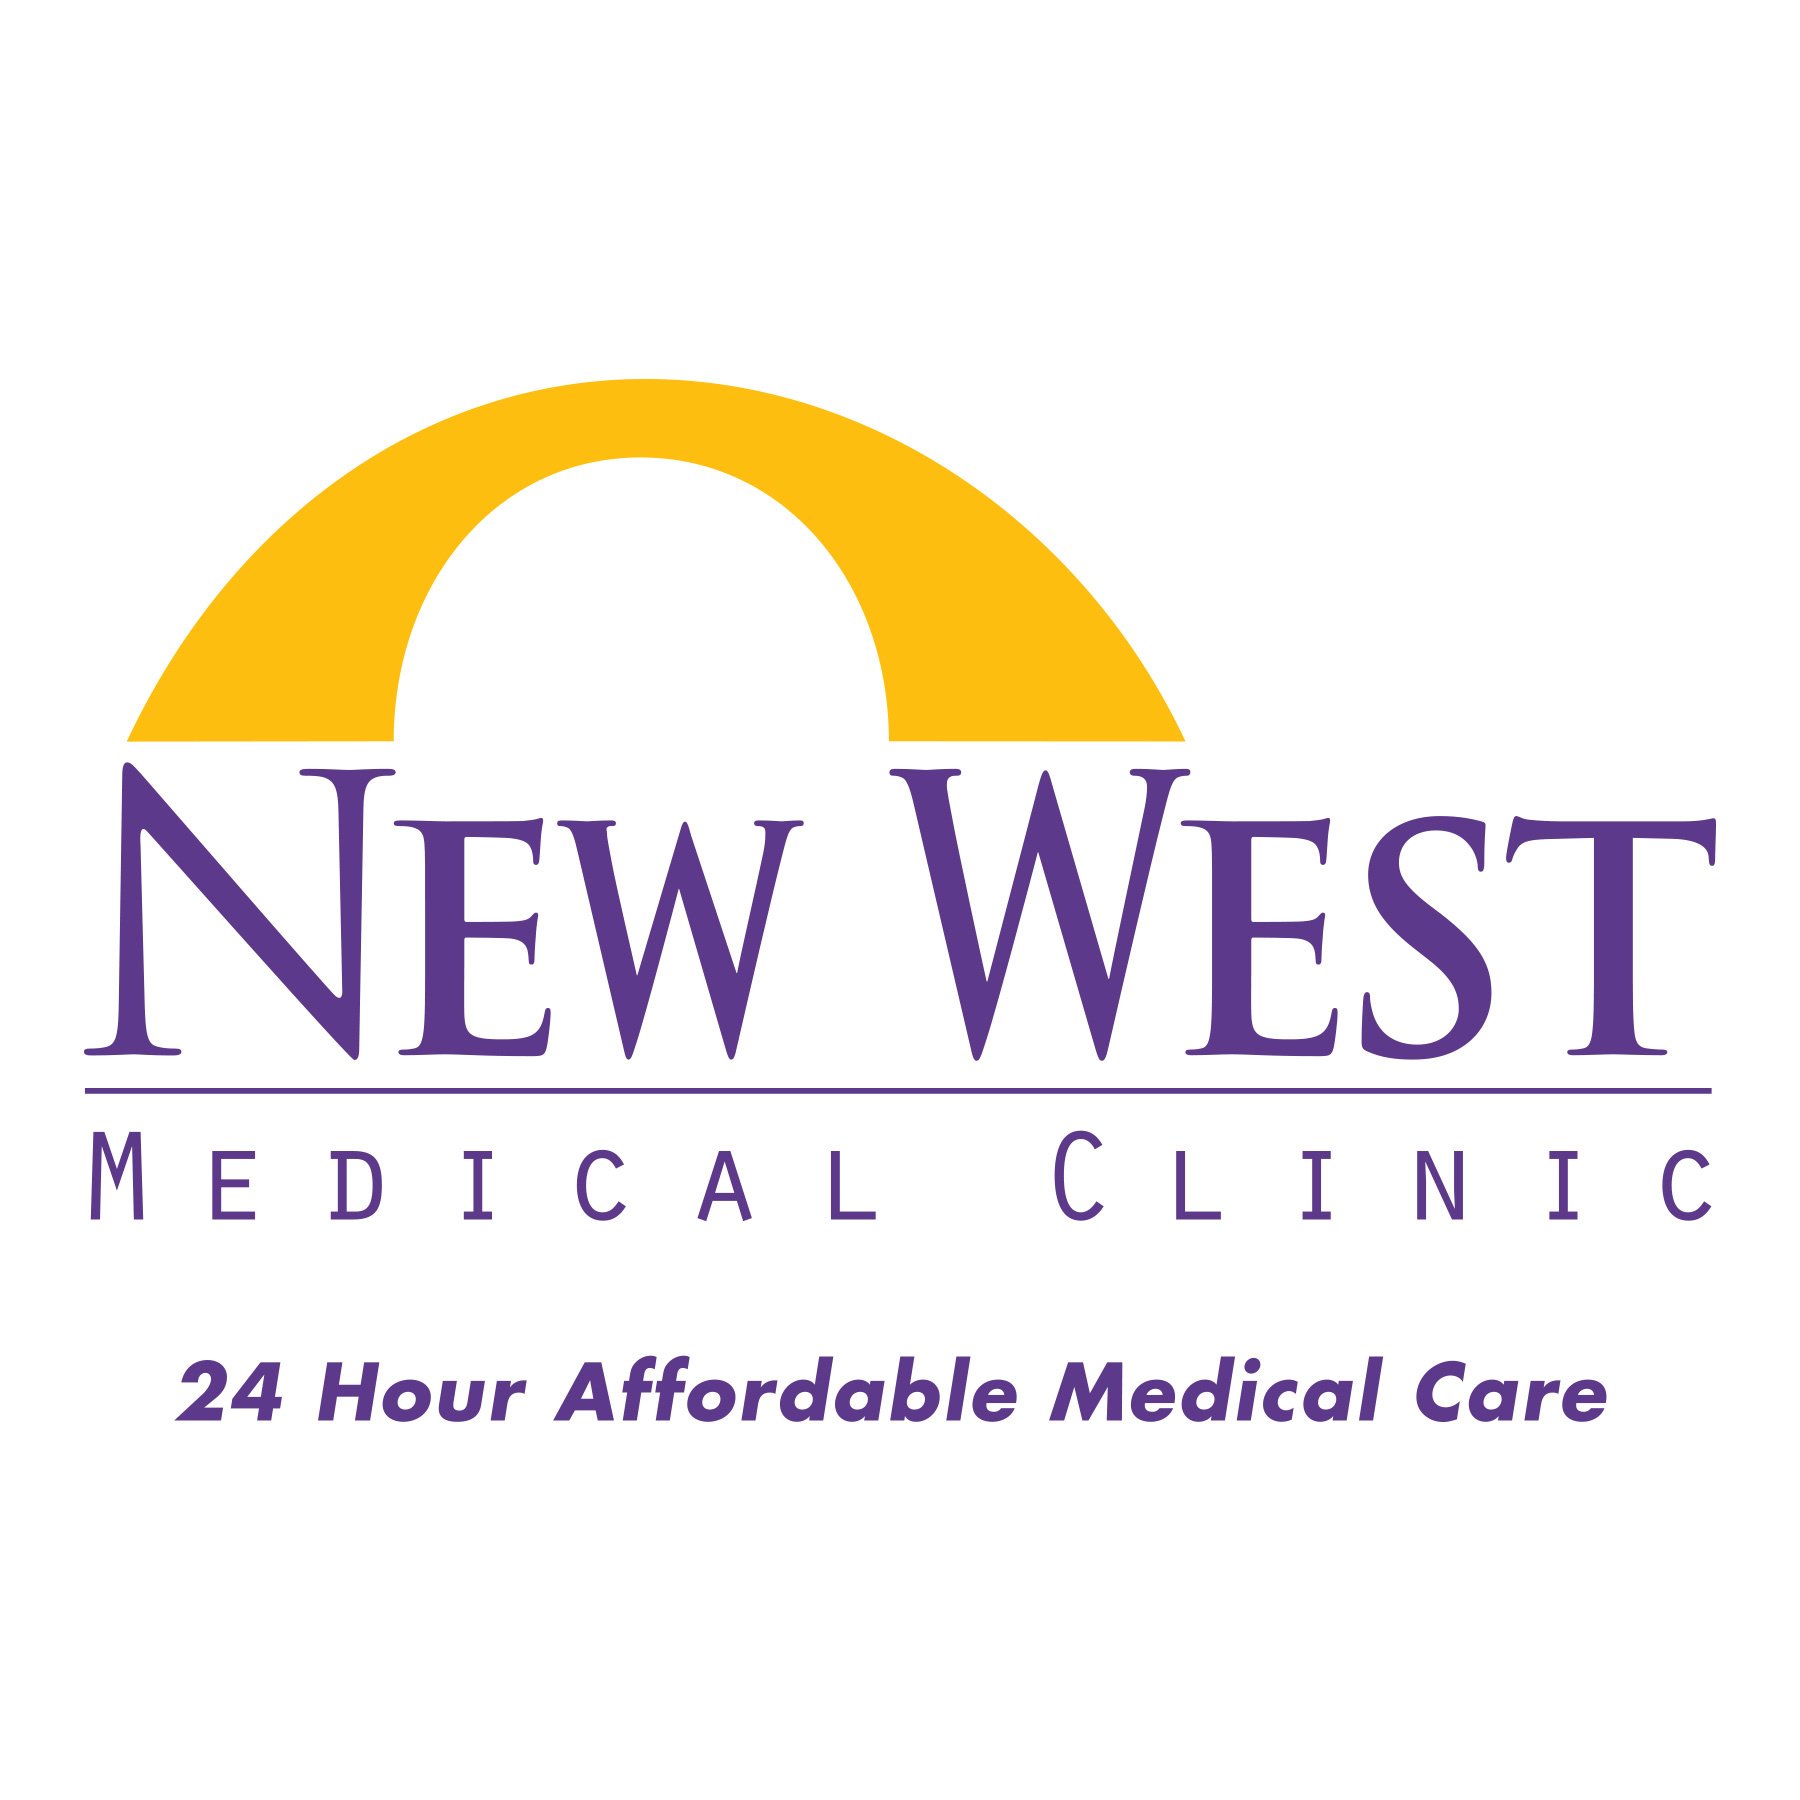 New West Medical Clinic Logo